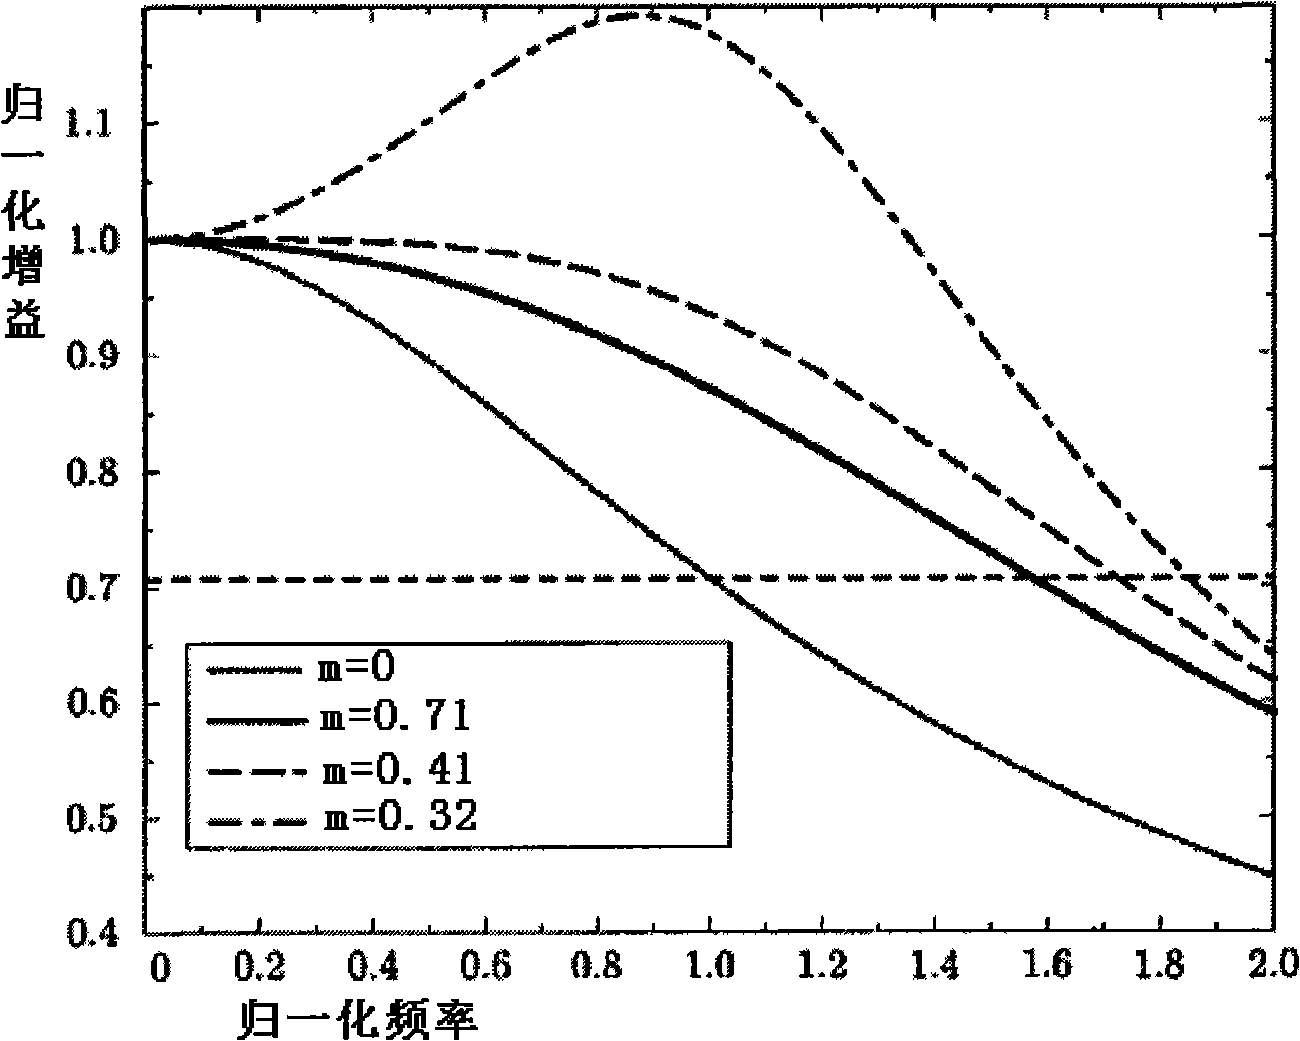 Active inductance parallel peaking structure